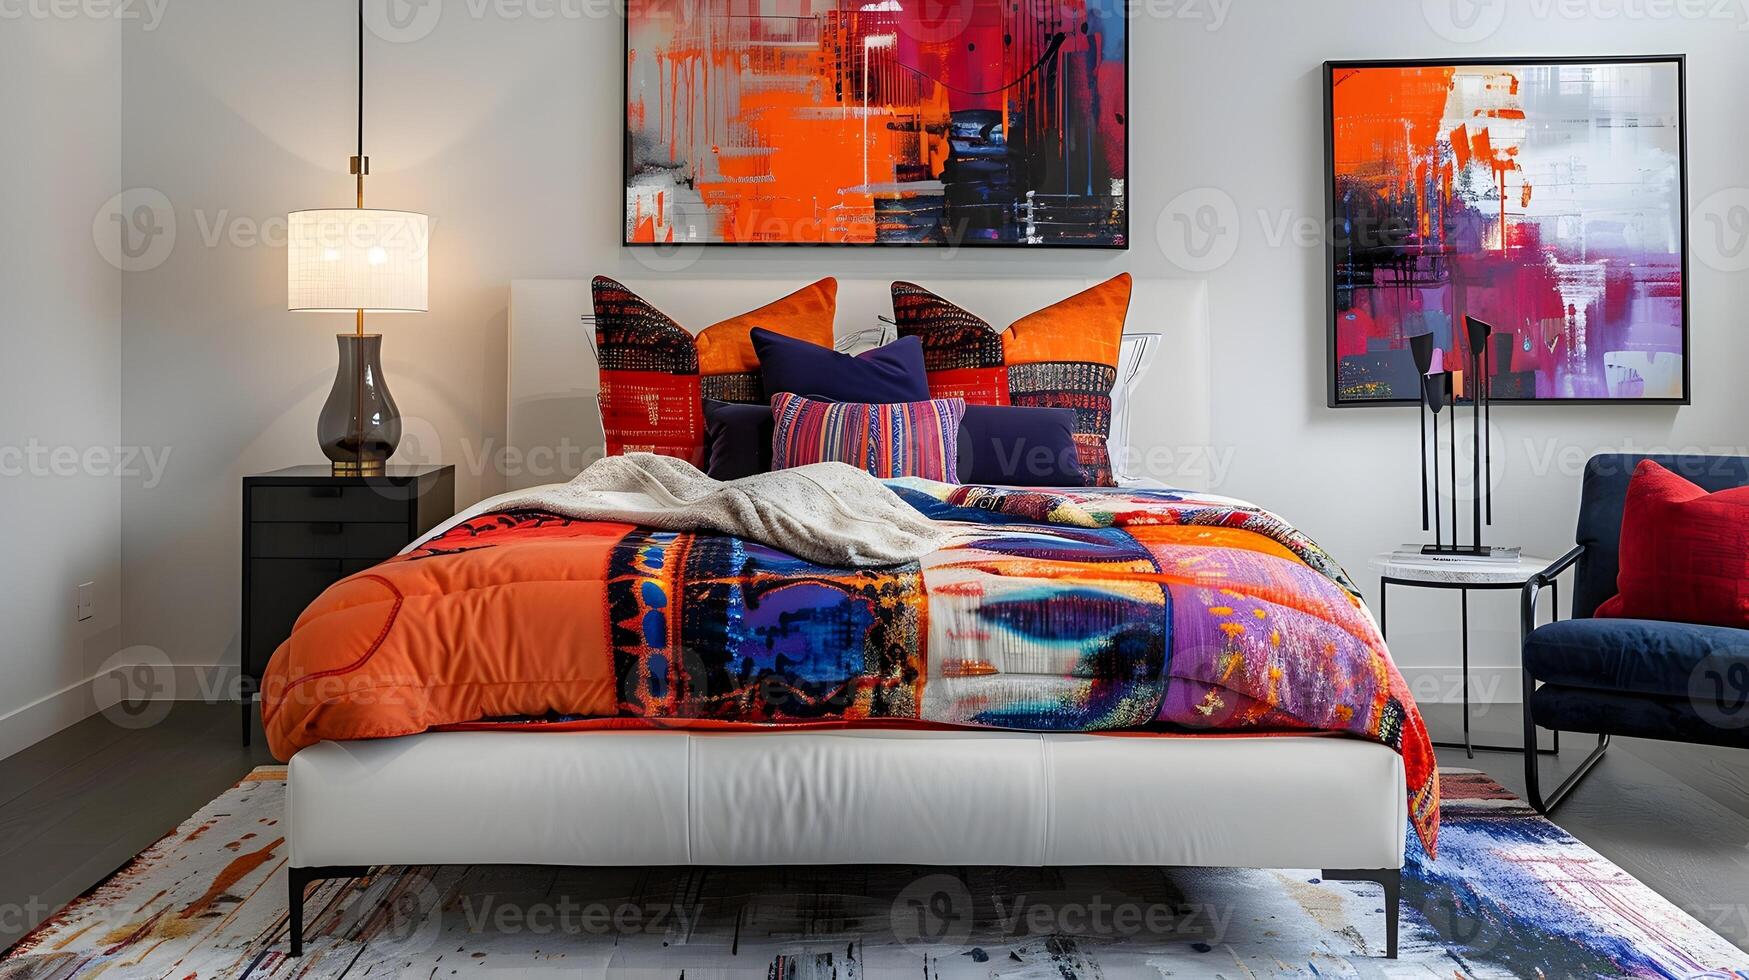 Modern Art Bed with Pop-Art Lamp in Innovative Gallery Bedroom Setting photo